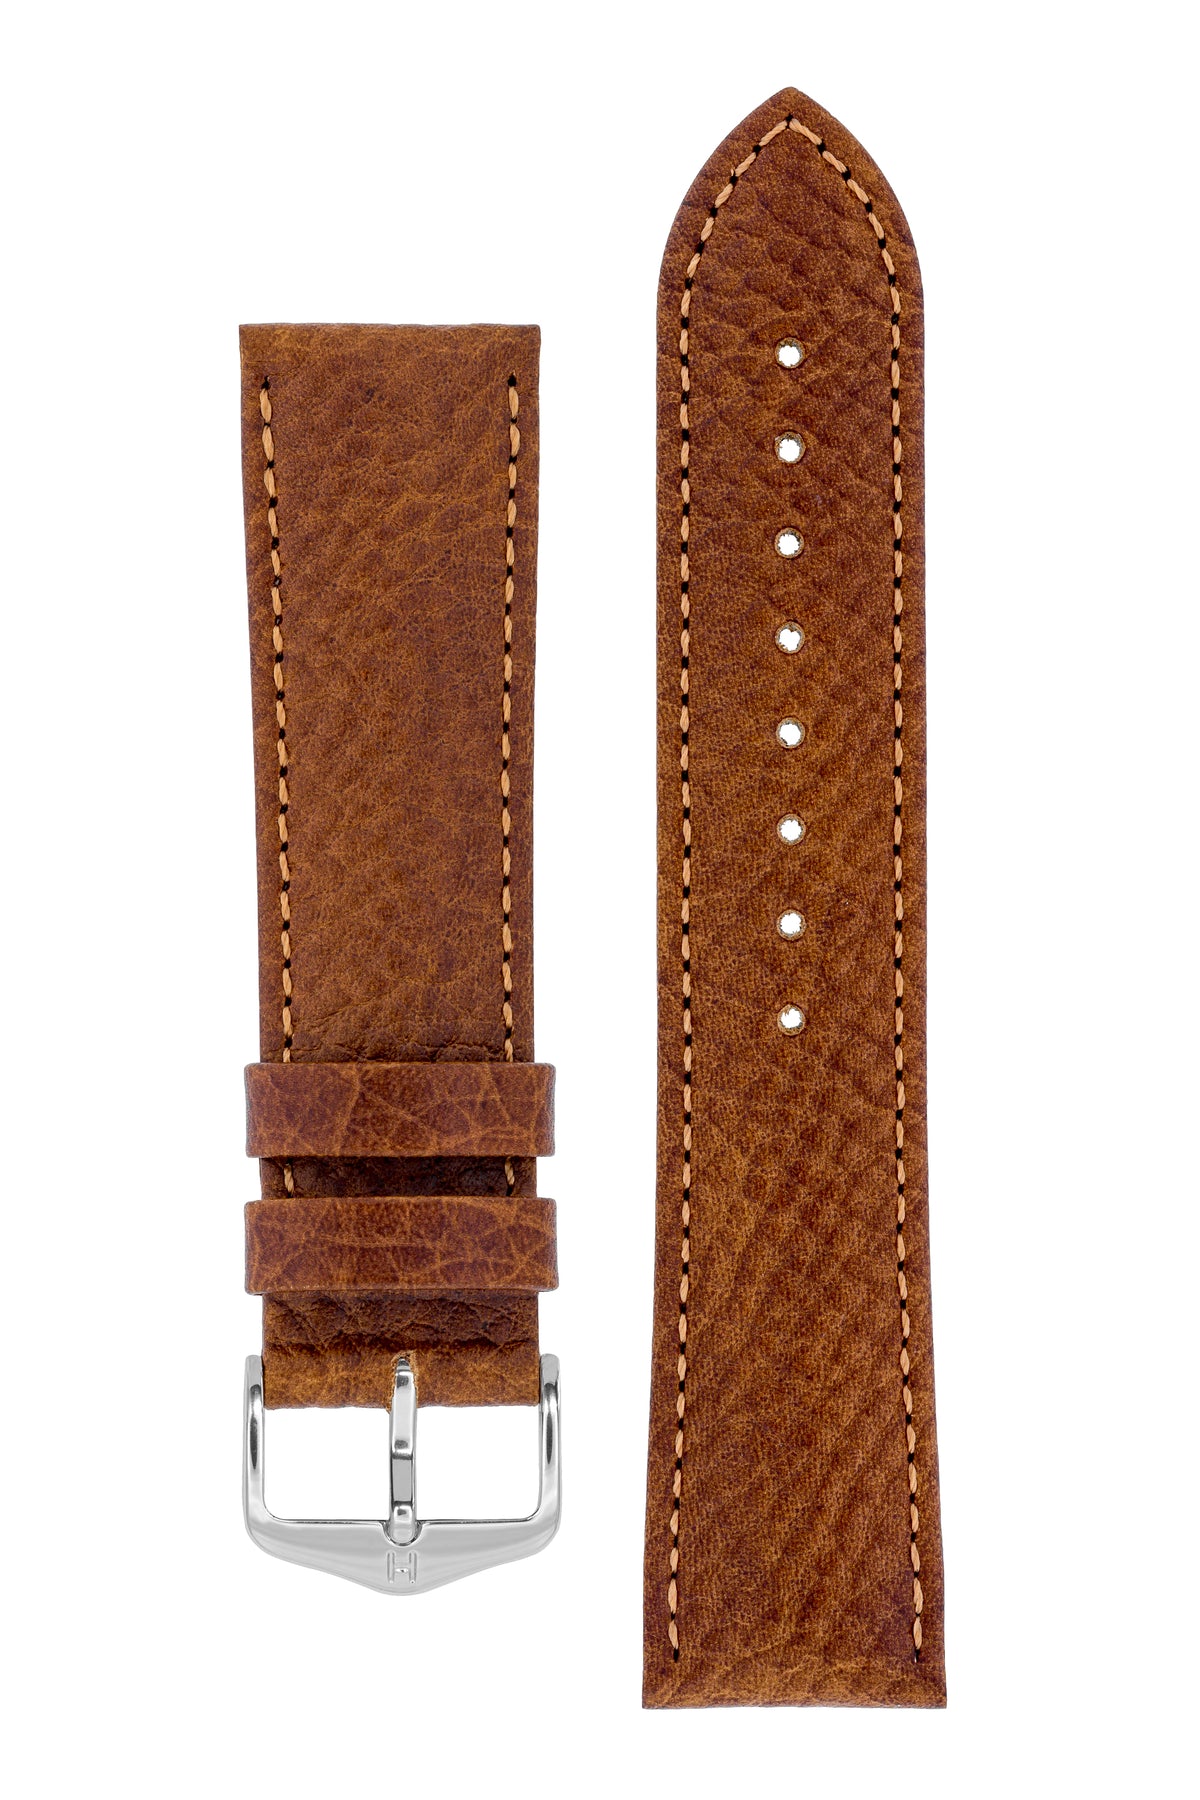 Hirsch FOREST Calf Leather Watch Strap in GOLD BROWN — HS by WatchObsession